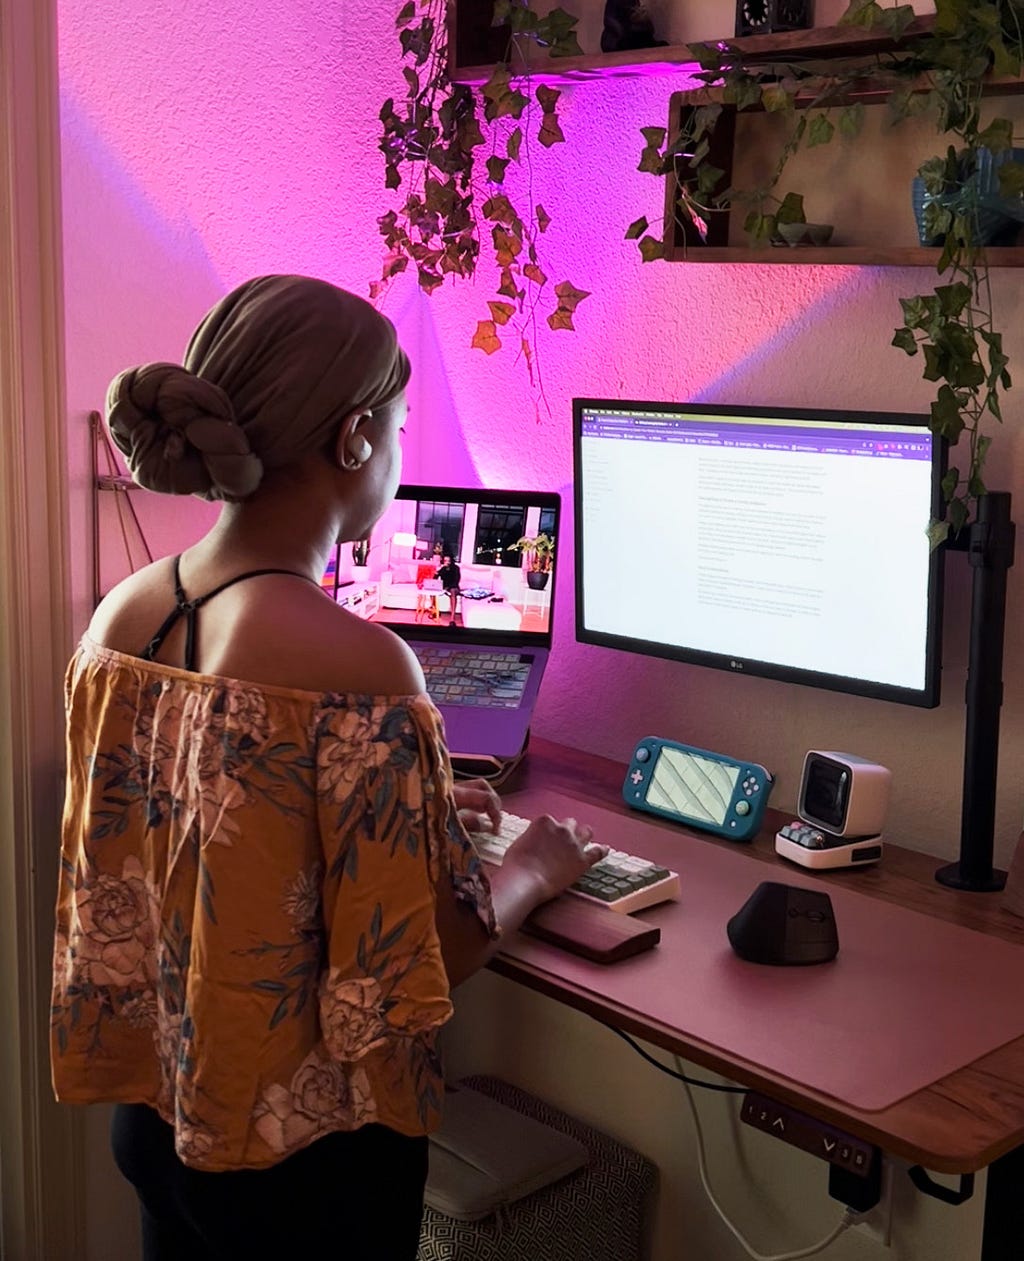 Black woman working on a computer at a standing desk, with purple lights.